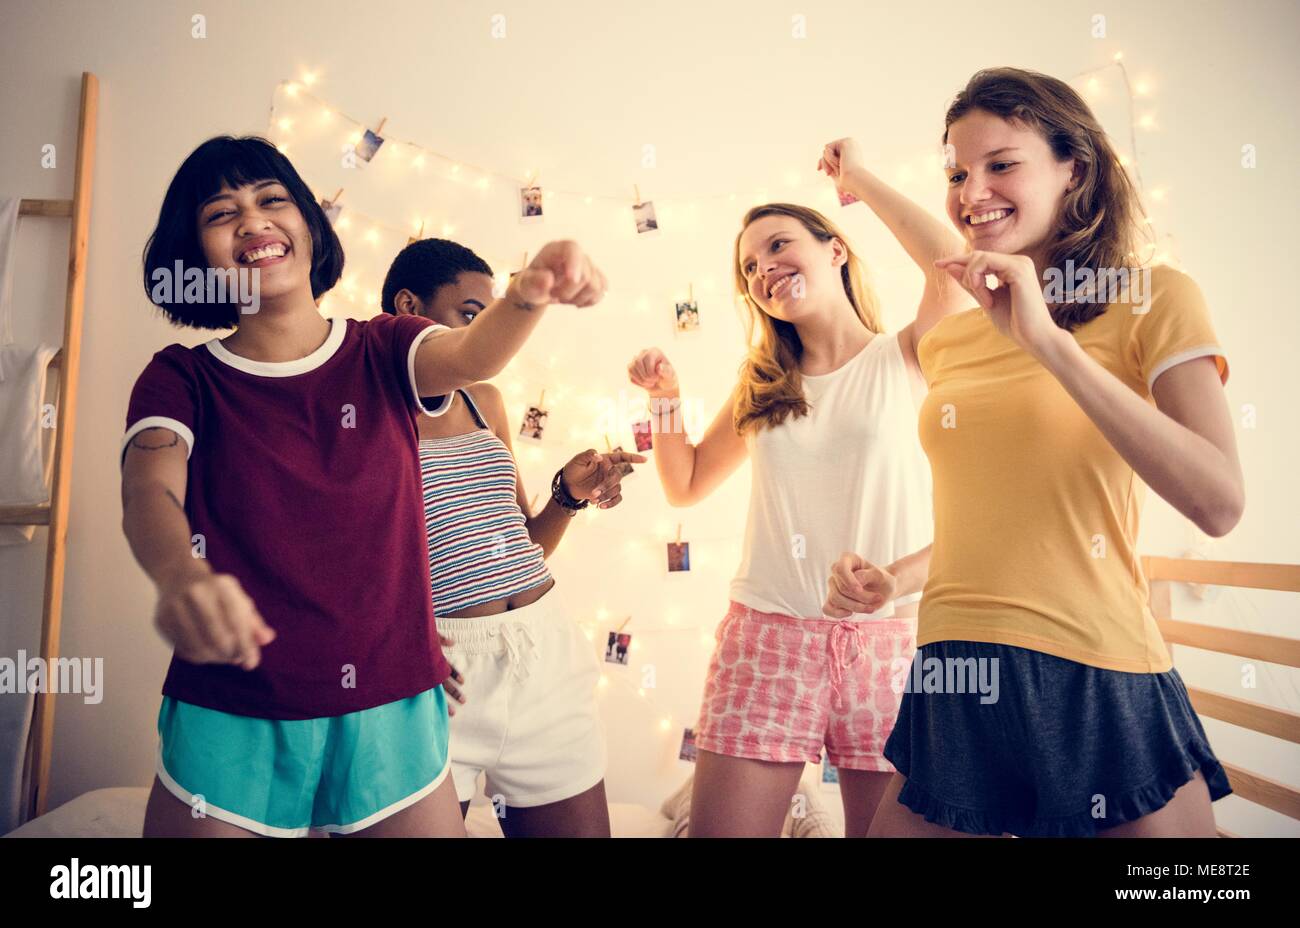 Group of diverse women having fun on the bed together Stock Photo